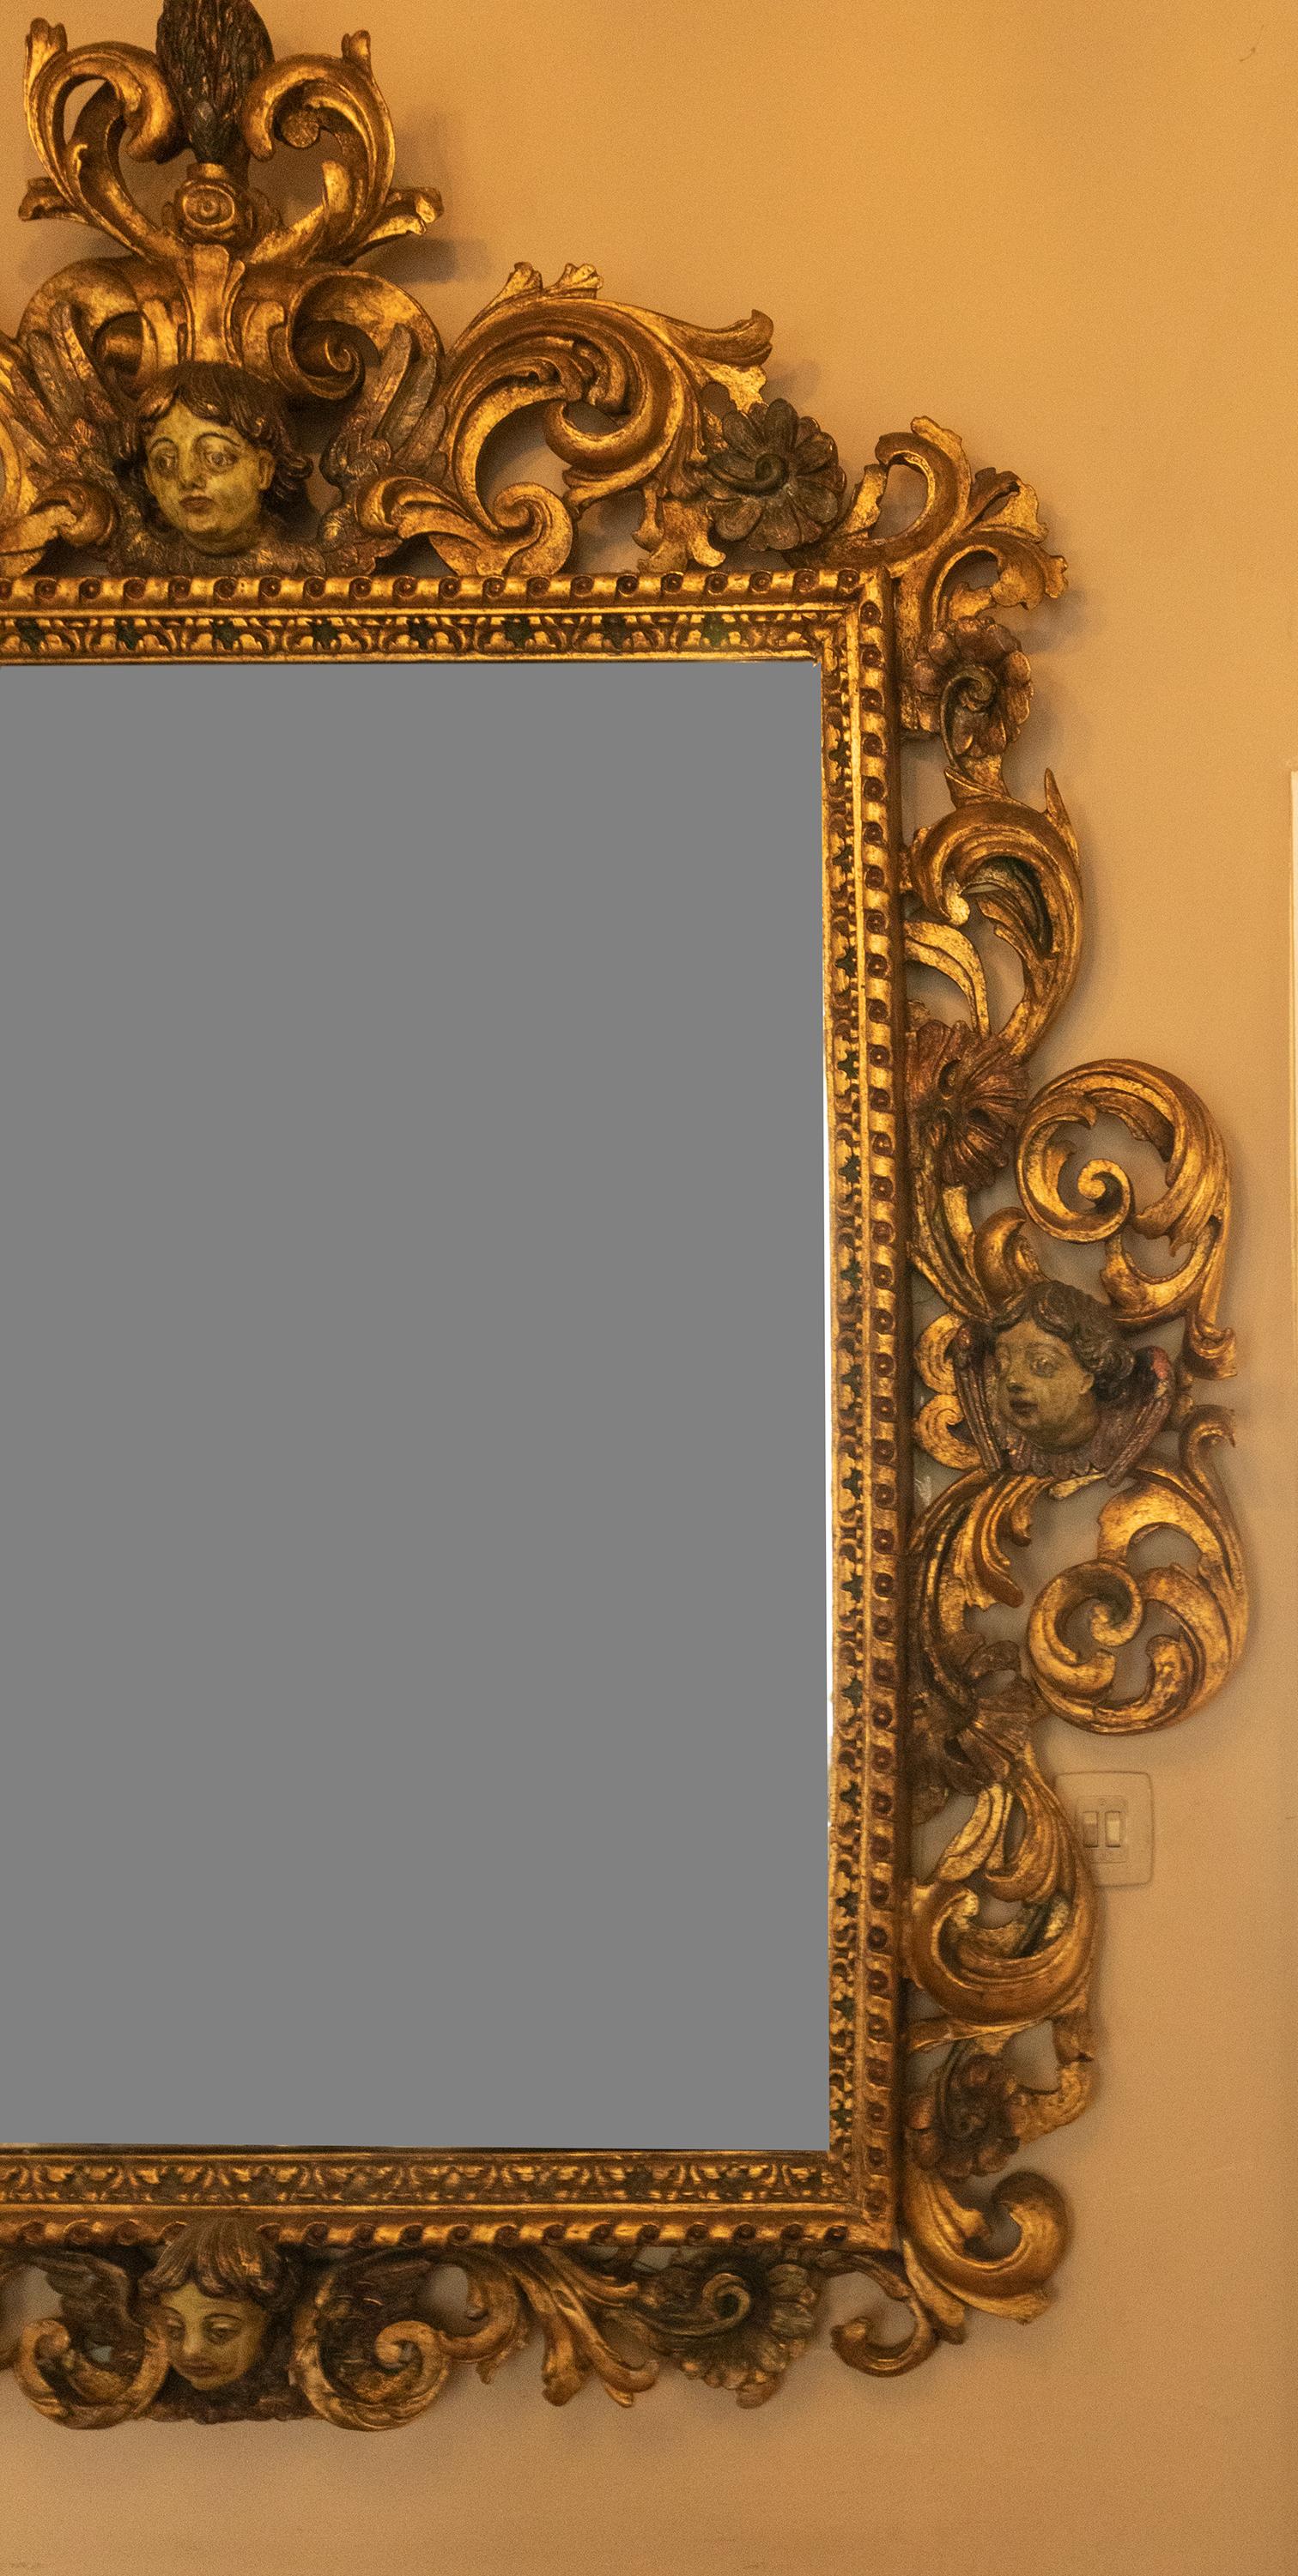 Hand-Carved 18th Century Portuguese Baroque Period Golden Gilt Mirror For Sale